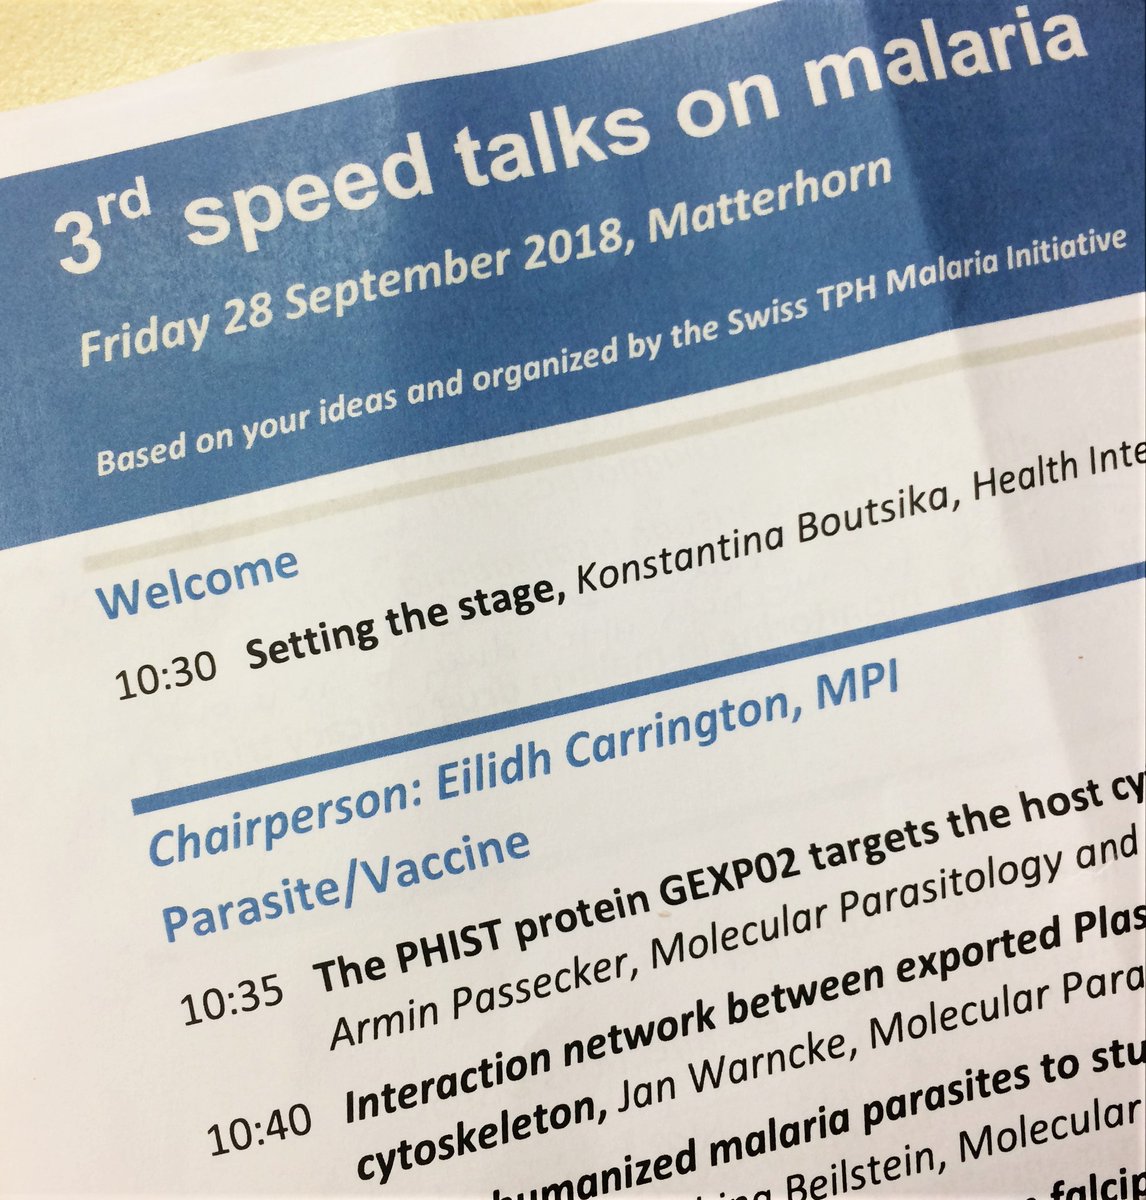 Thanks for having us at the 3rd speed talks on #malaria, @SwissTPH !
With over 200 employees working on malaria-related projects, the @SwissTPH certainly has an impact in the fight against the disease!
#EndMalaira #GemeinsamGegenMalaria #SchweizWirkt